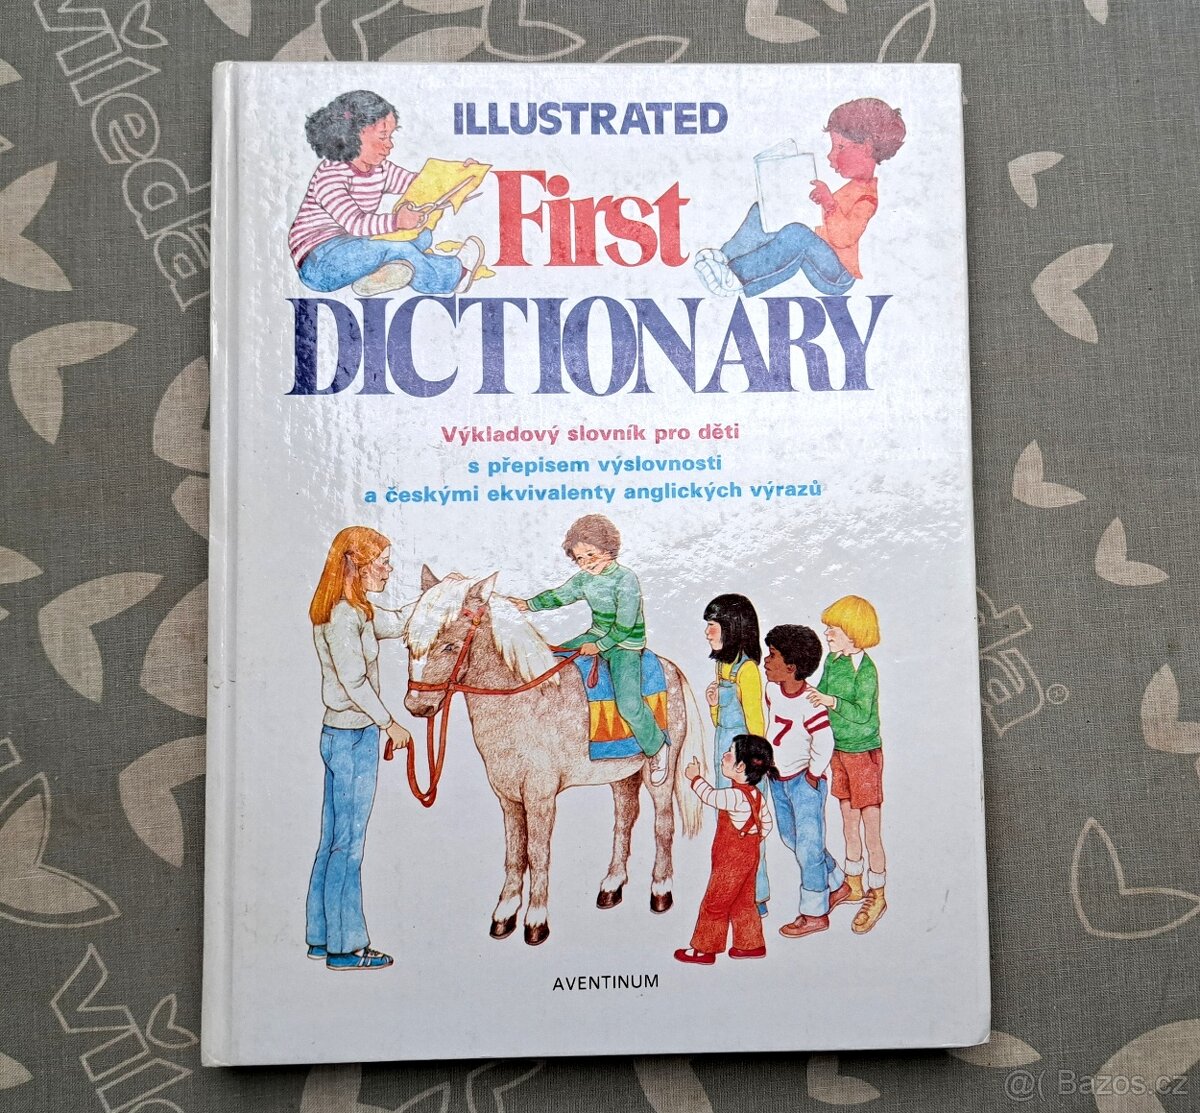 Illustrated first dictionary